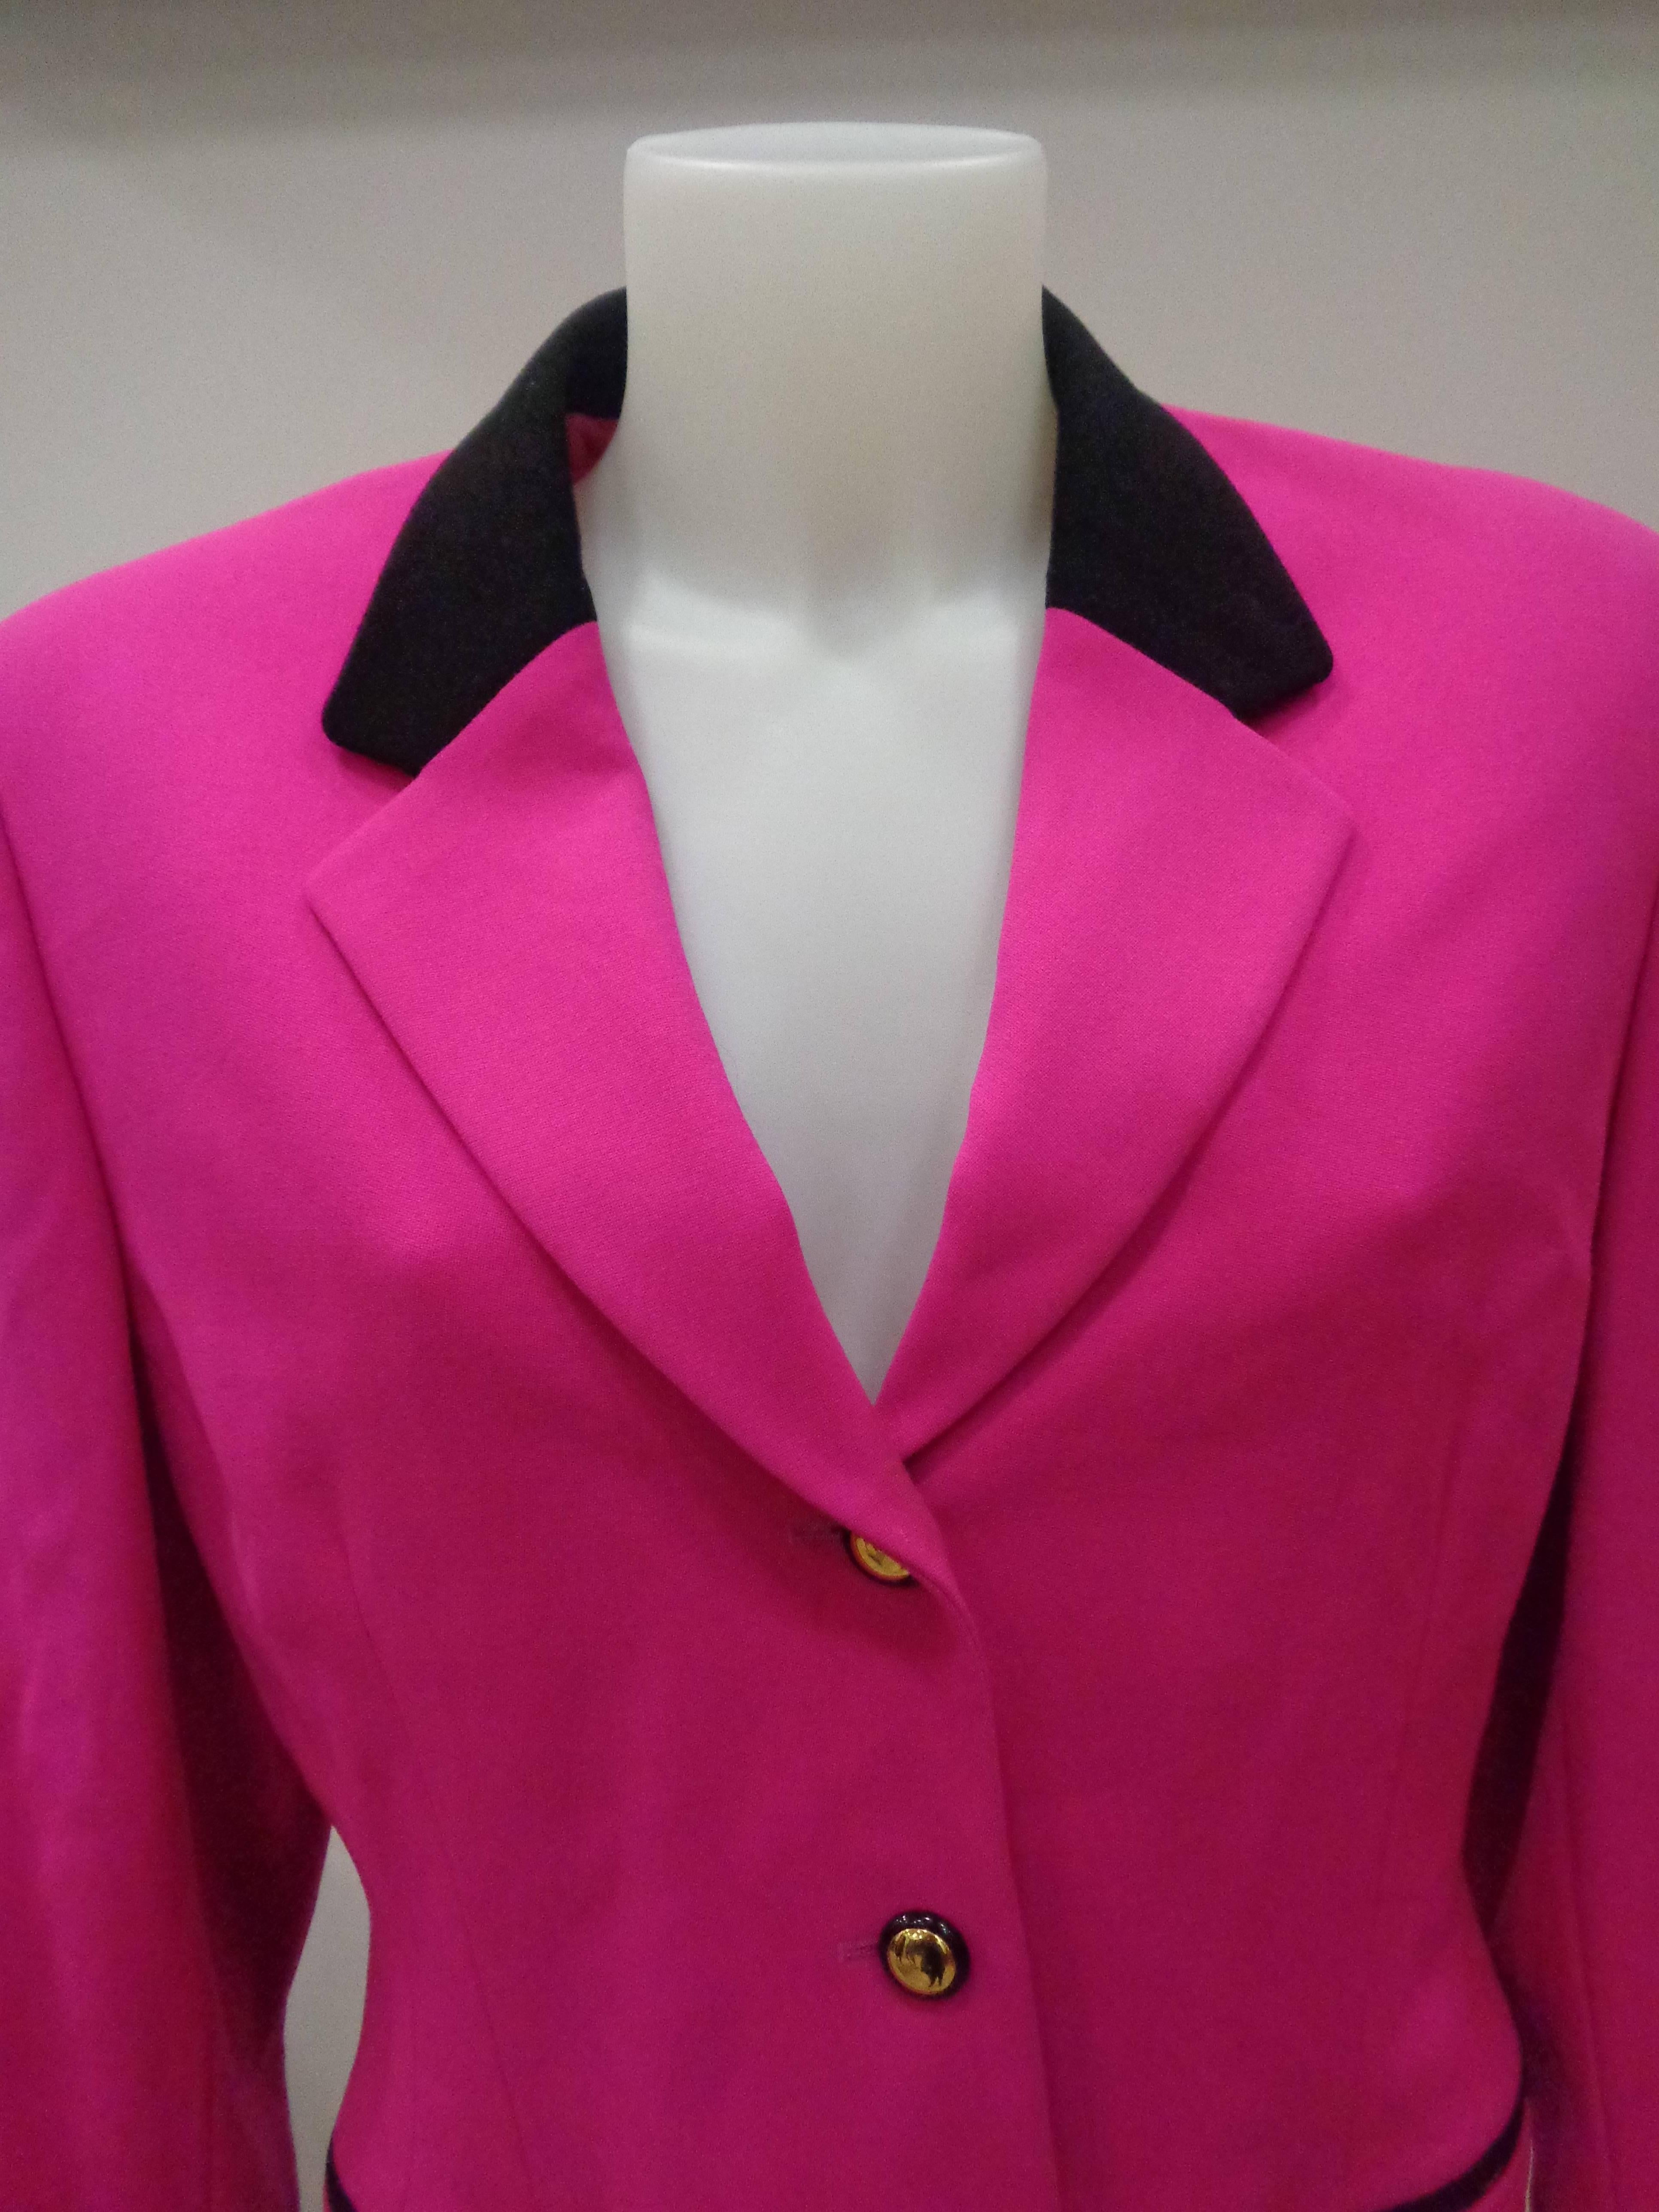 Escada by Margaretha Ley Fucsia Wool Jacket

Totally made in germany 

Composition: 100% Wool

Lining: 100% Silk

